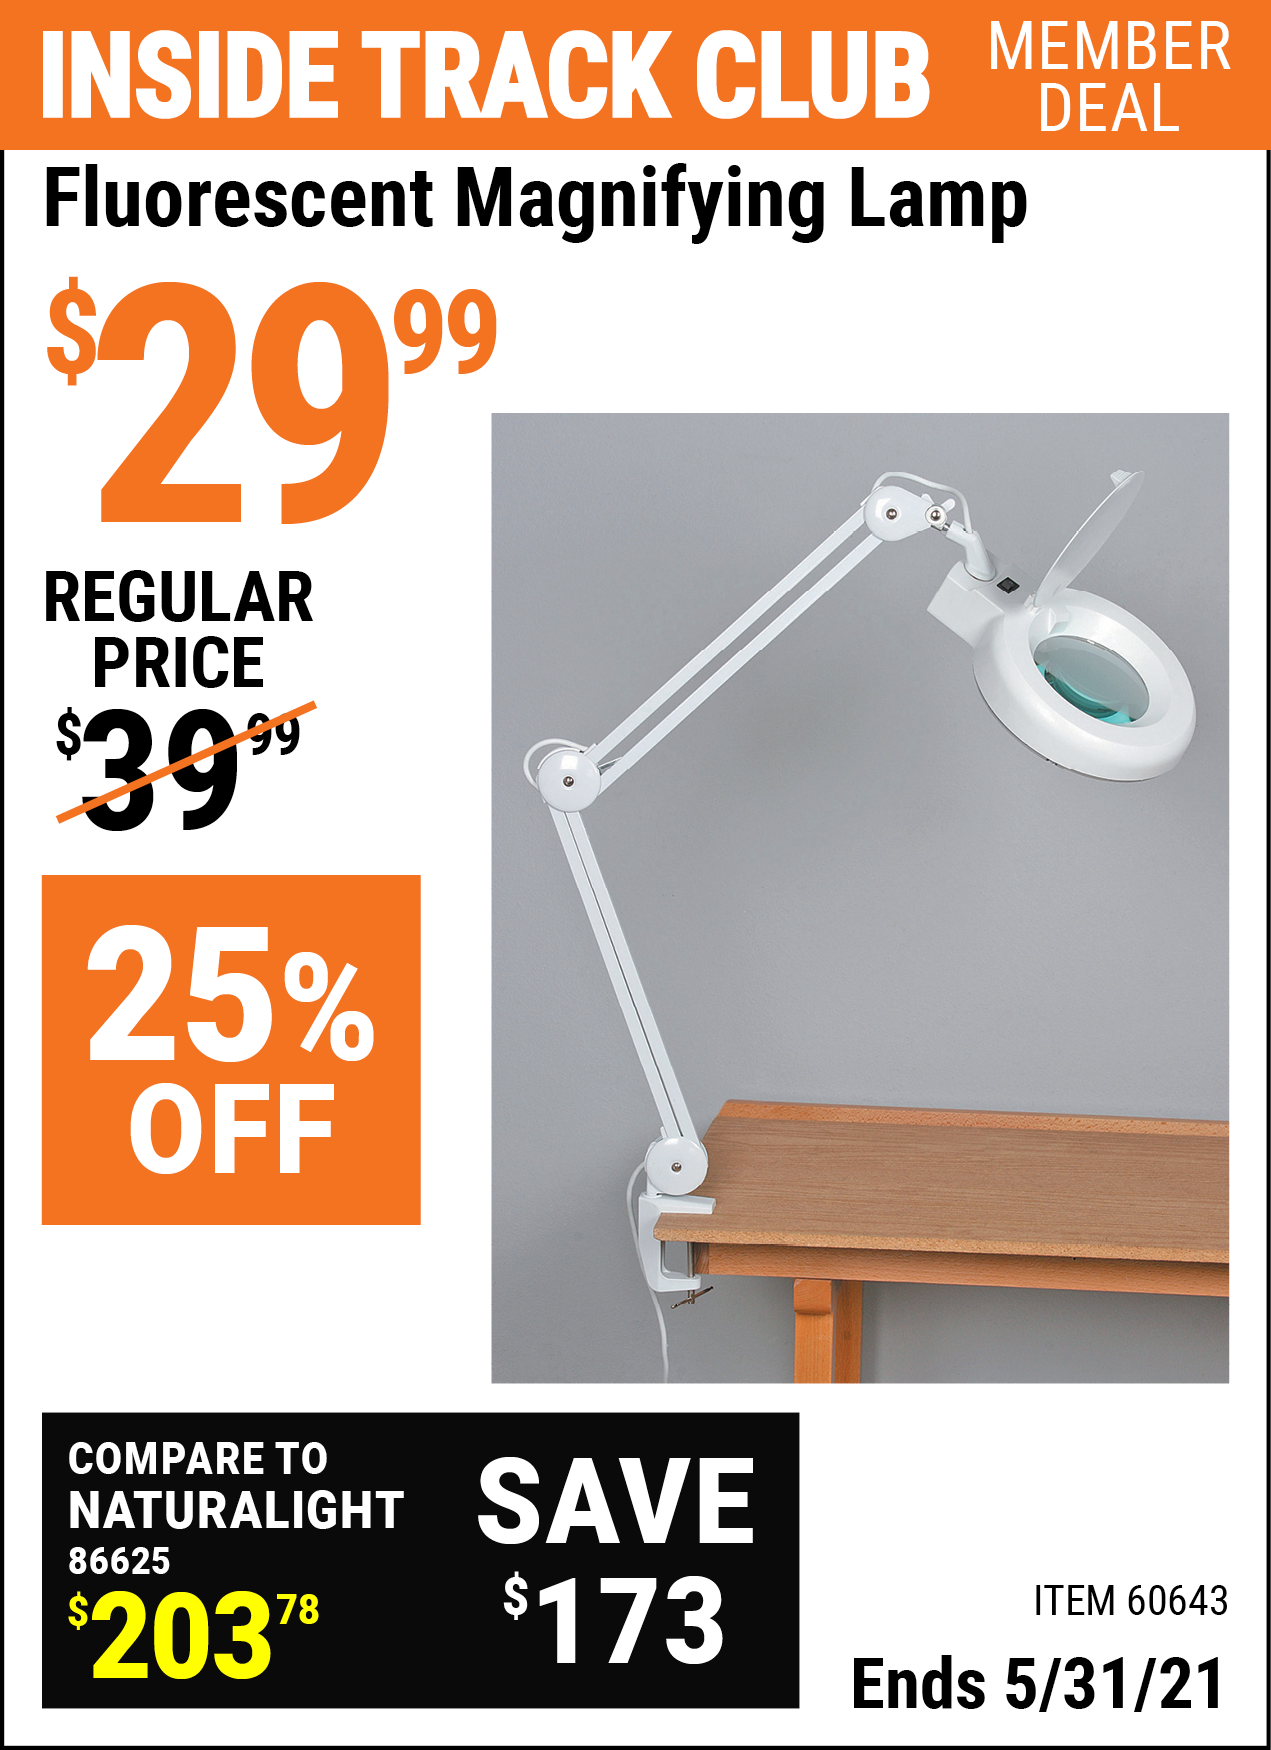 Inside Track Club members can buy the HFT Fluorescent Magnifying Lamp (Item 60643) for $29.99, valid through 5/31/2021.